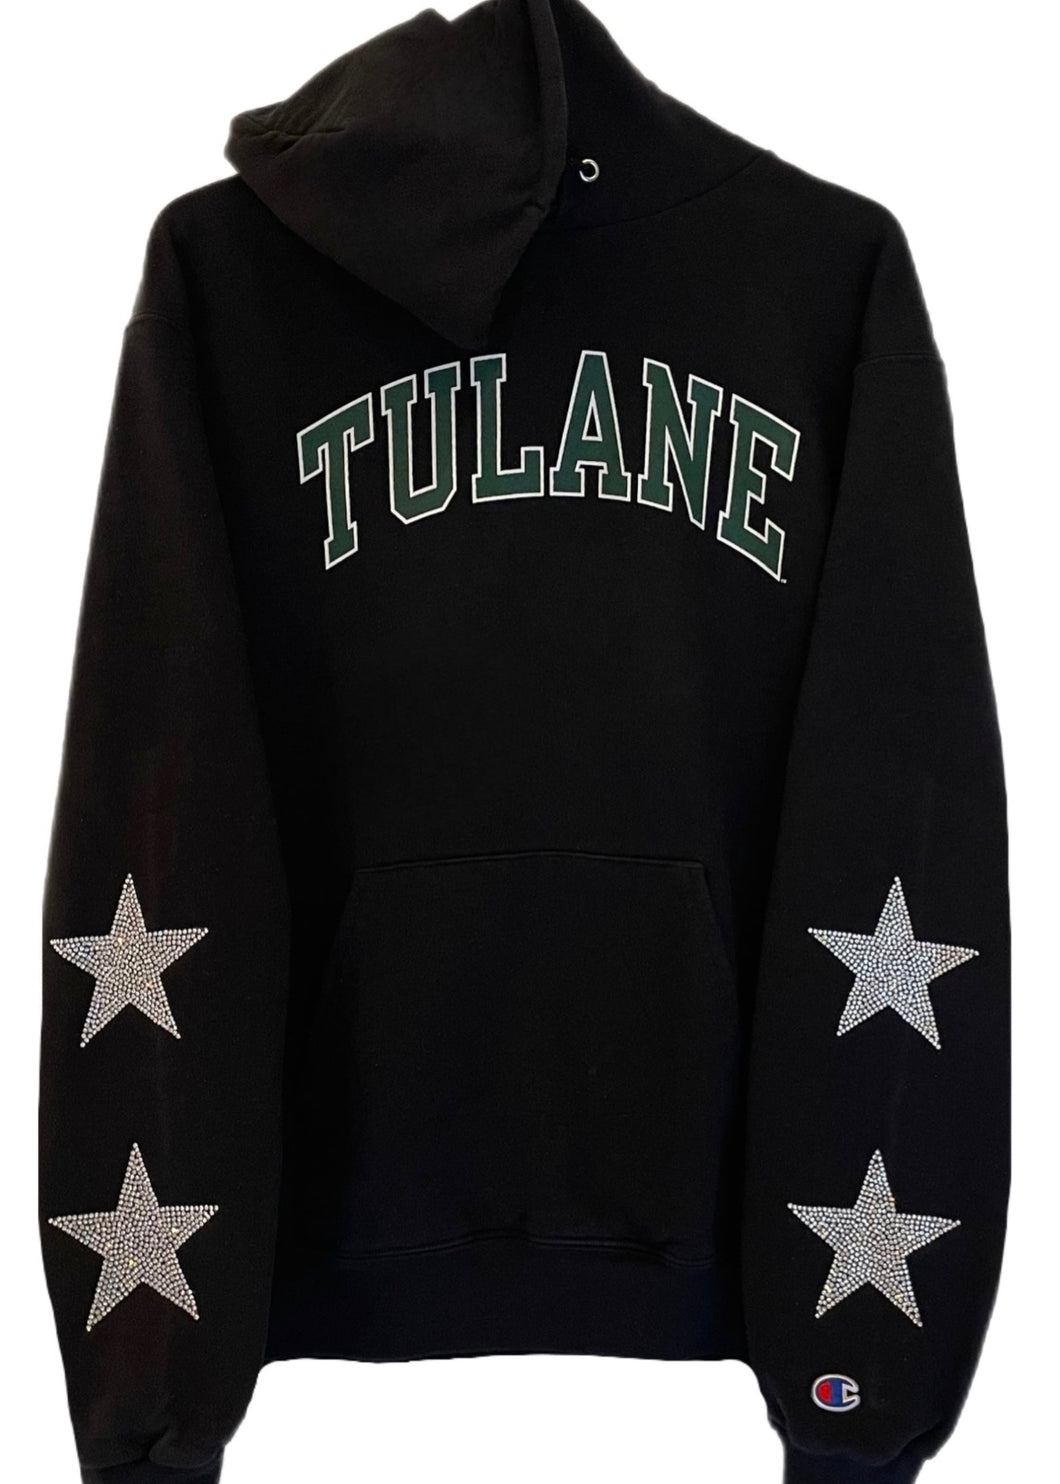 Tulane University, One of a KIND Vintage Hoodie with Crystal Star Design